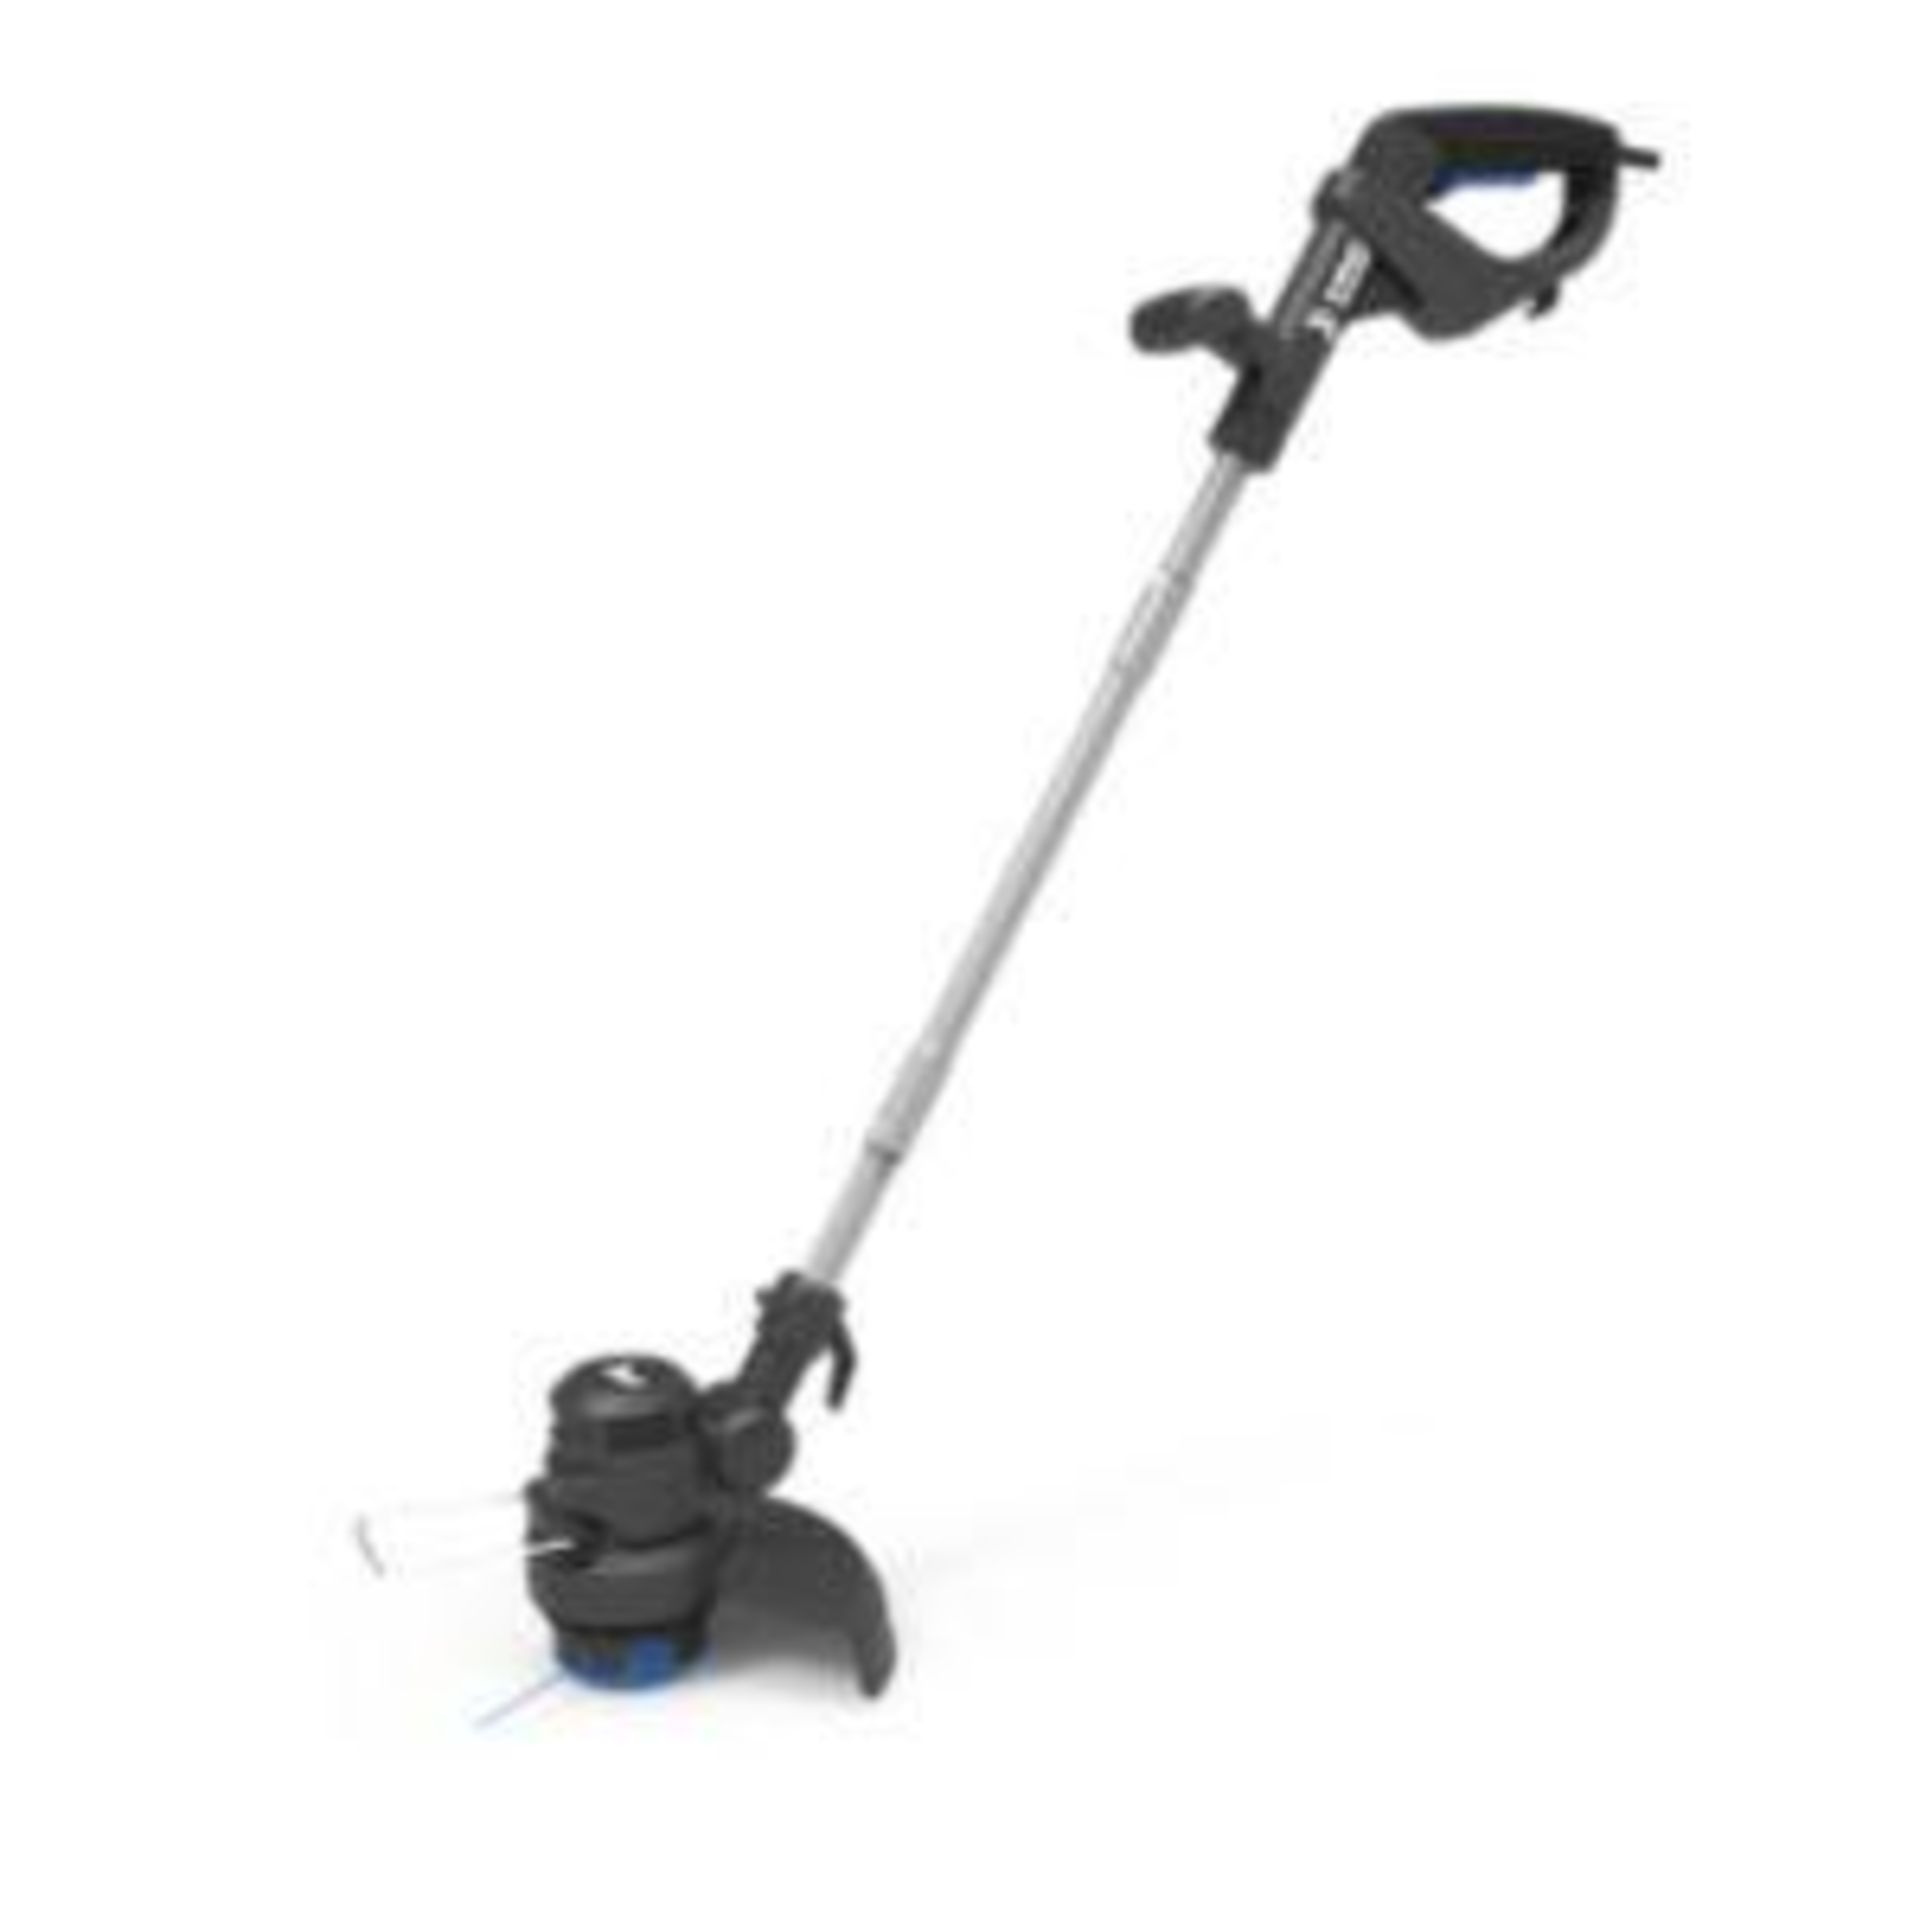 Mac Allister Mgt35025 350W Corded Grass Trimmer - R45. This corded grass trimmer is perfect for